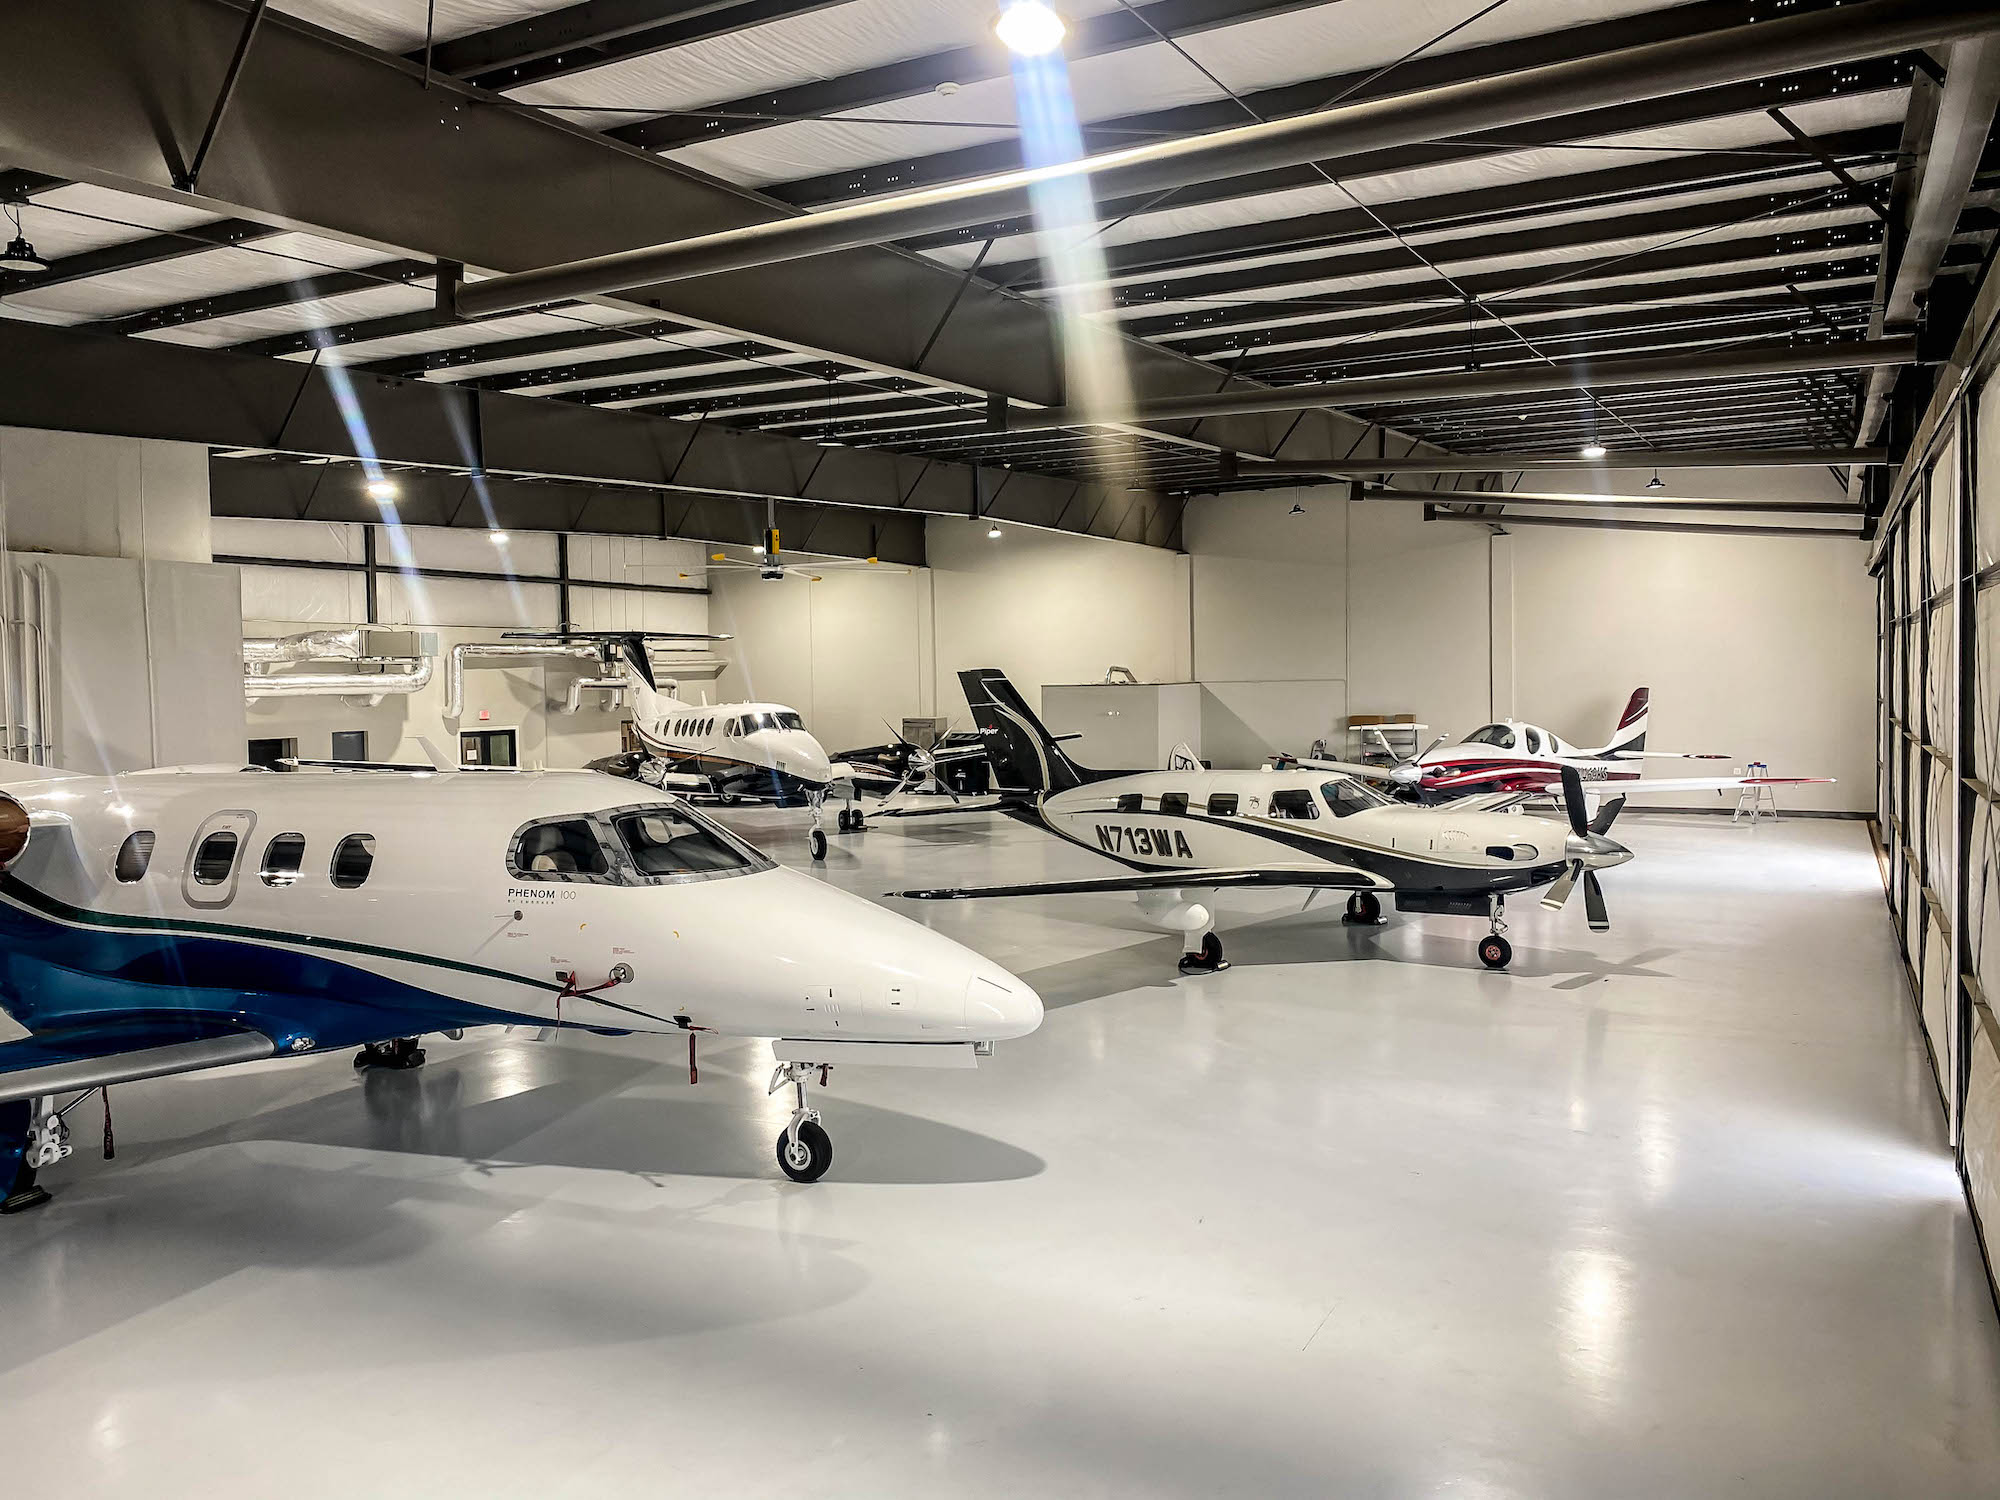 Multiple airplanes parked within the hangar